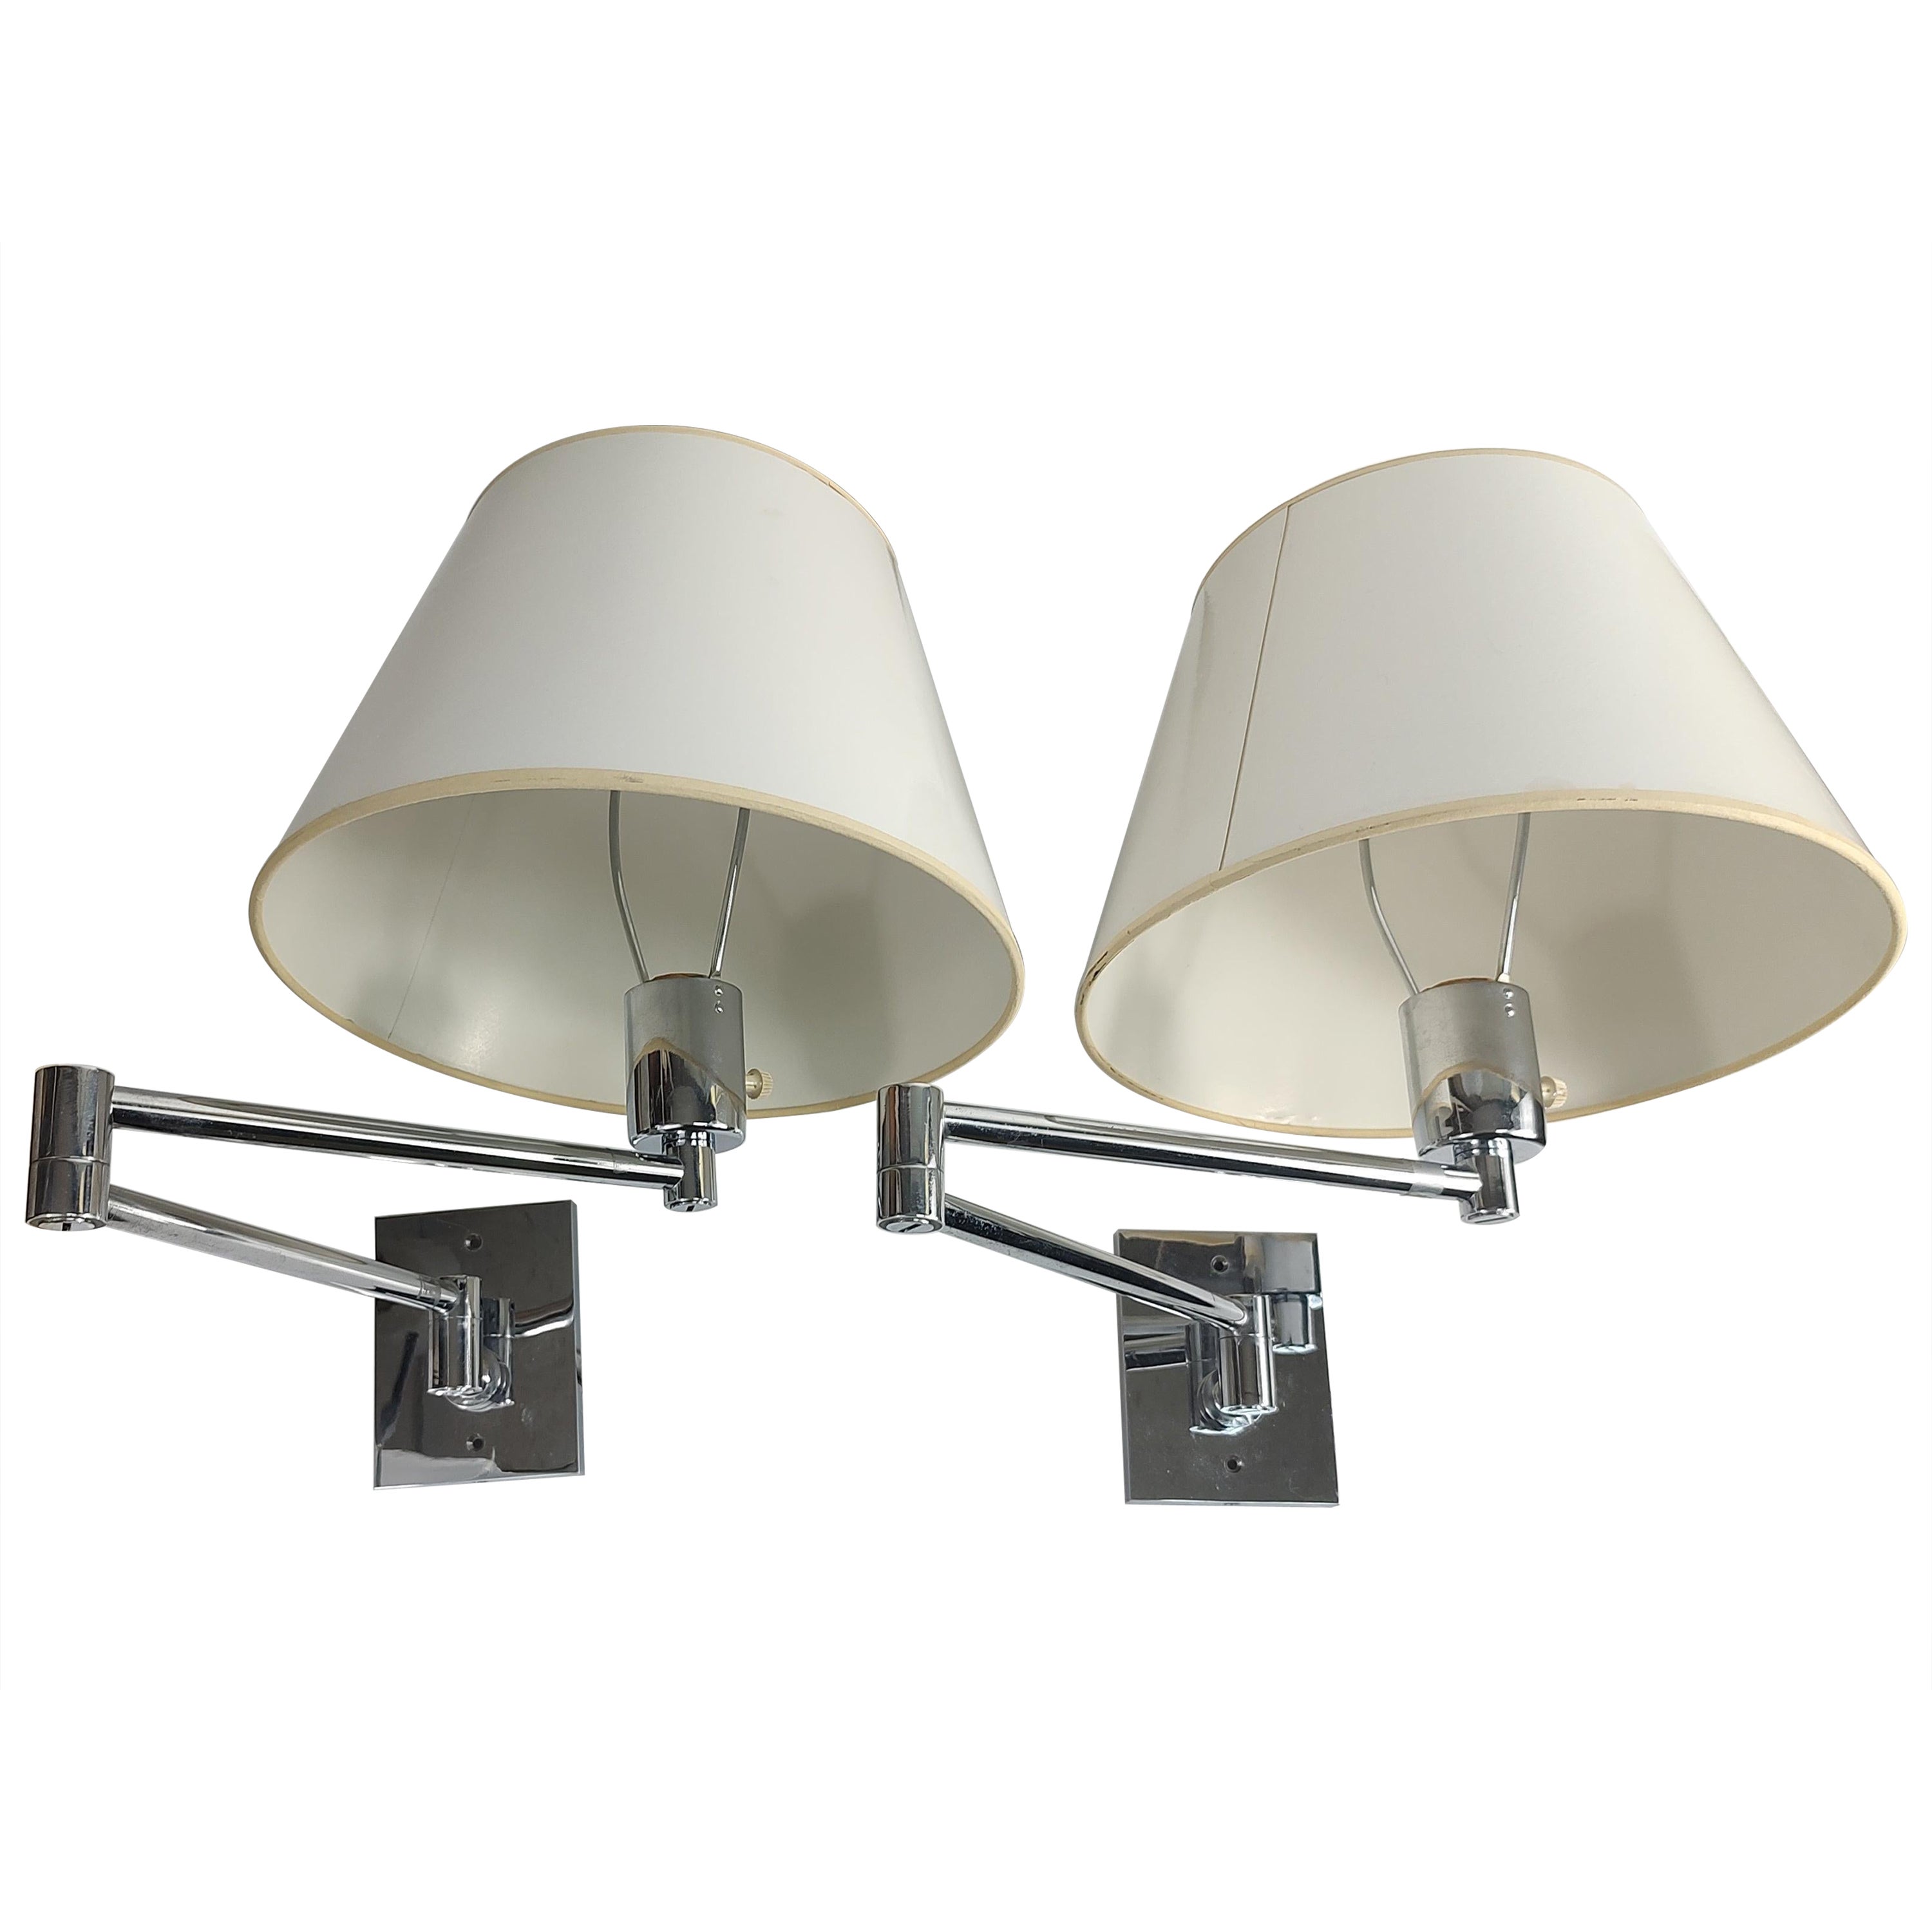 Pair of Mid Century Modern Chrome Swing Arm Wall Sconces By Hansen Lighting Co. For Sale